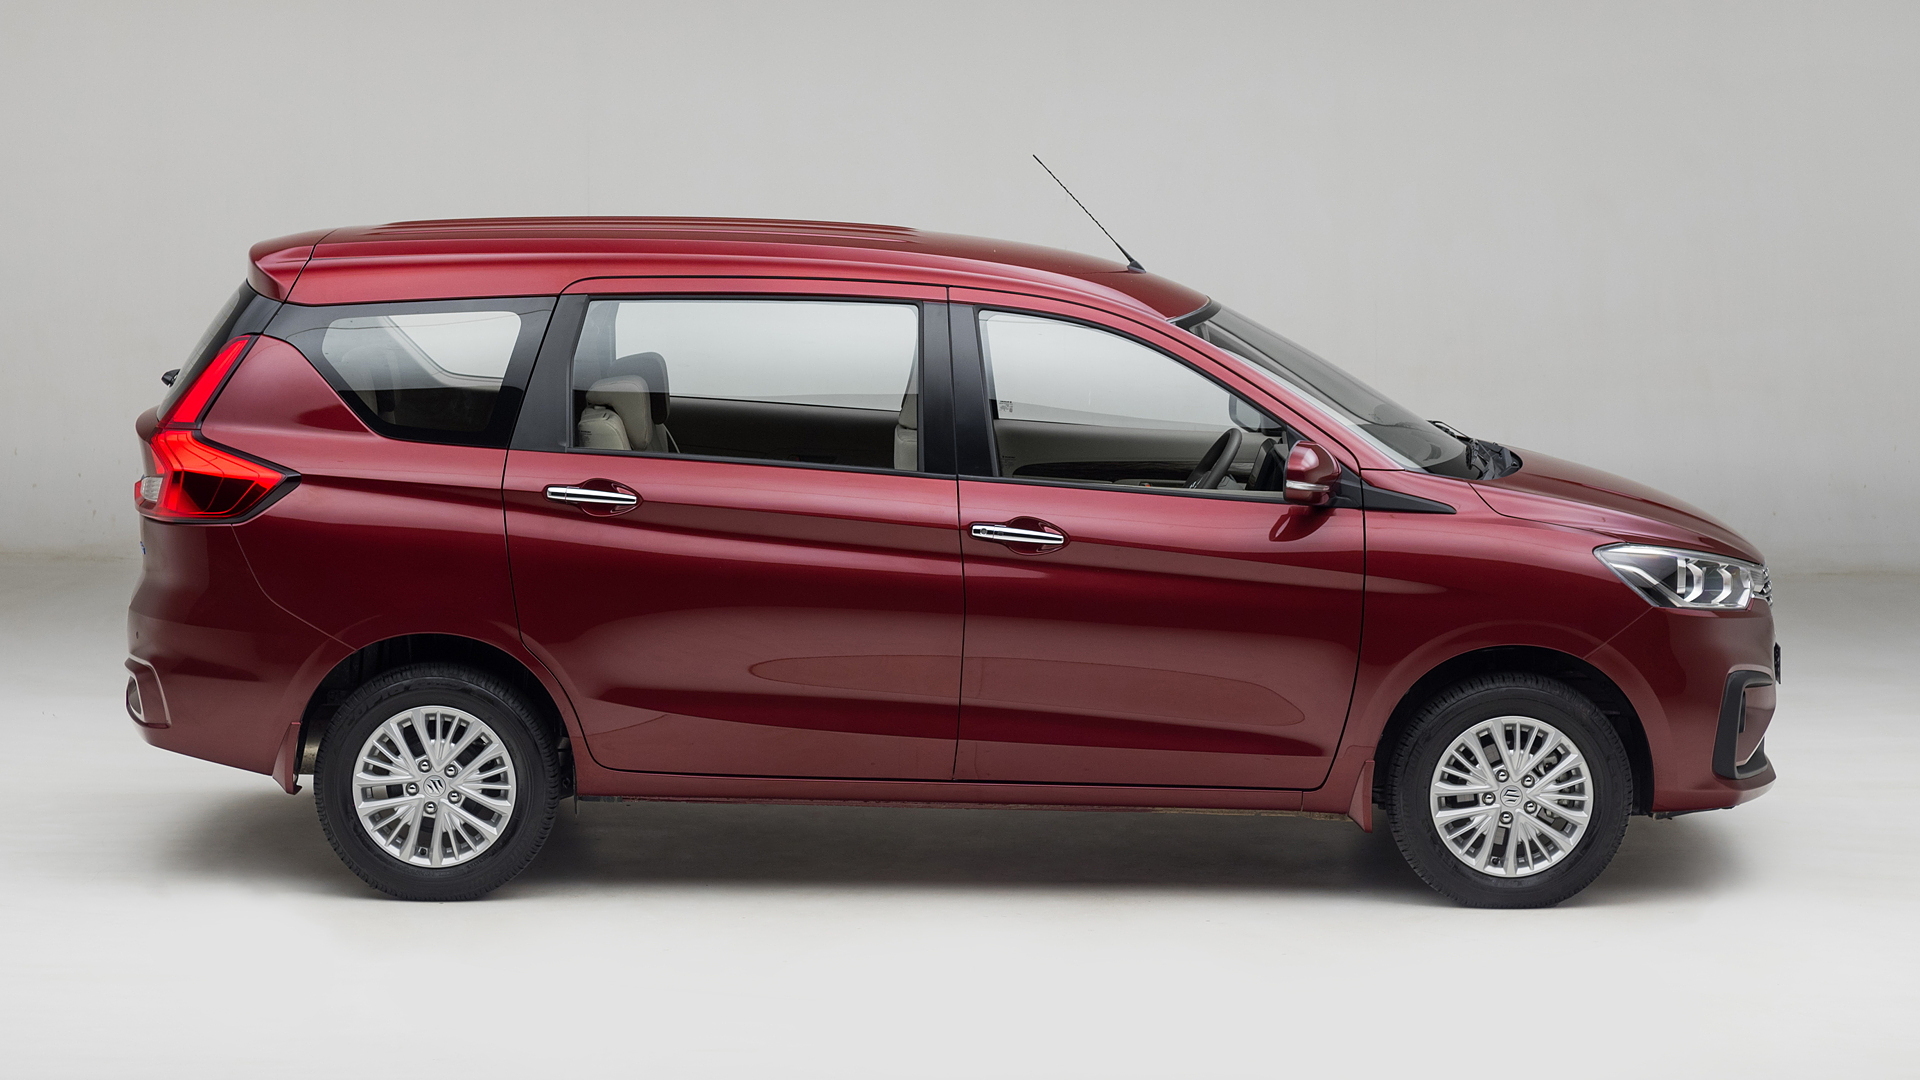 7 Seater Cars Under 10 Lakhs